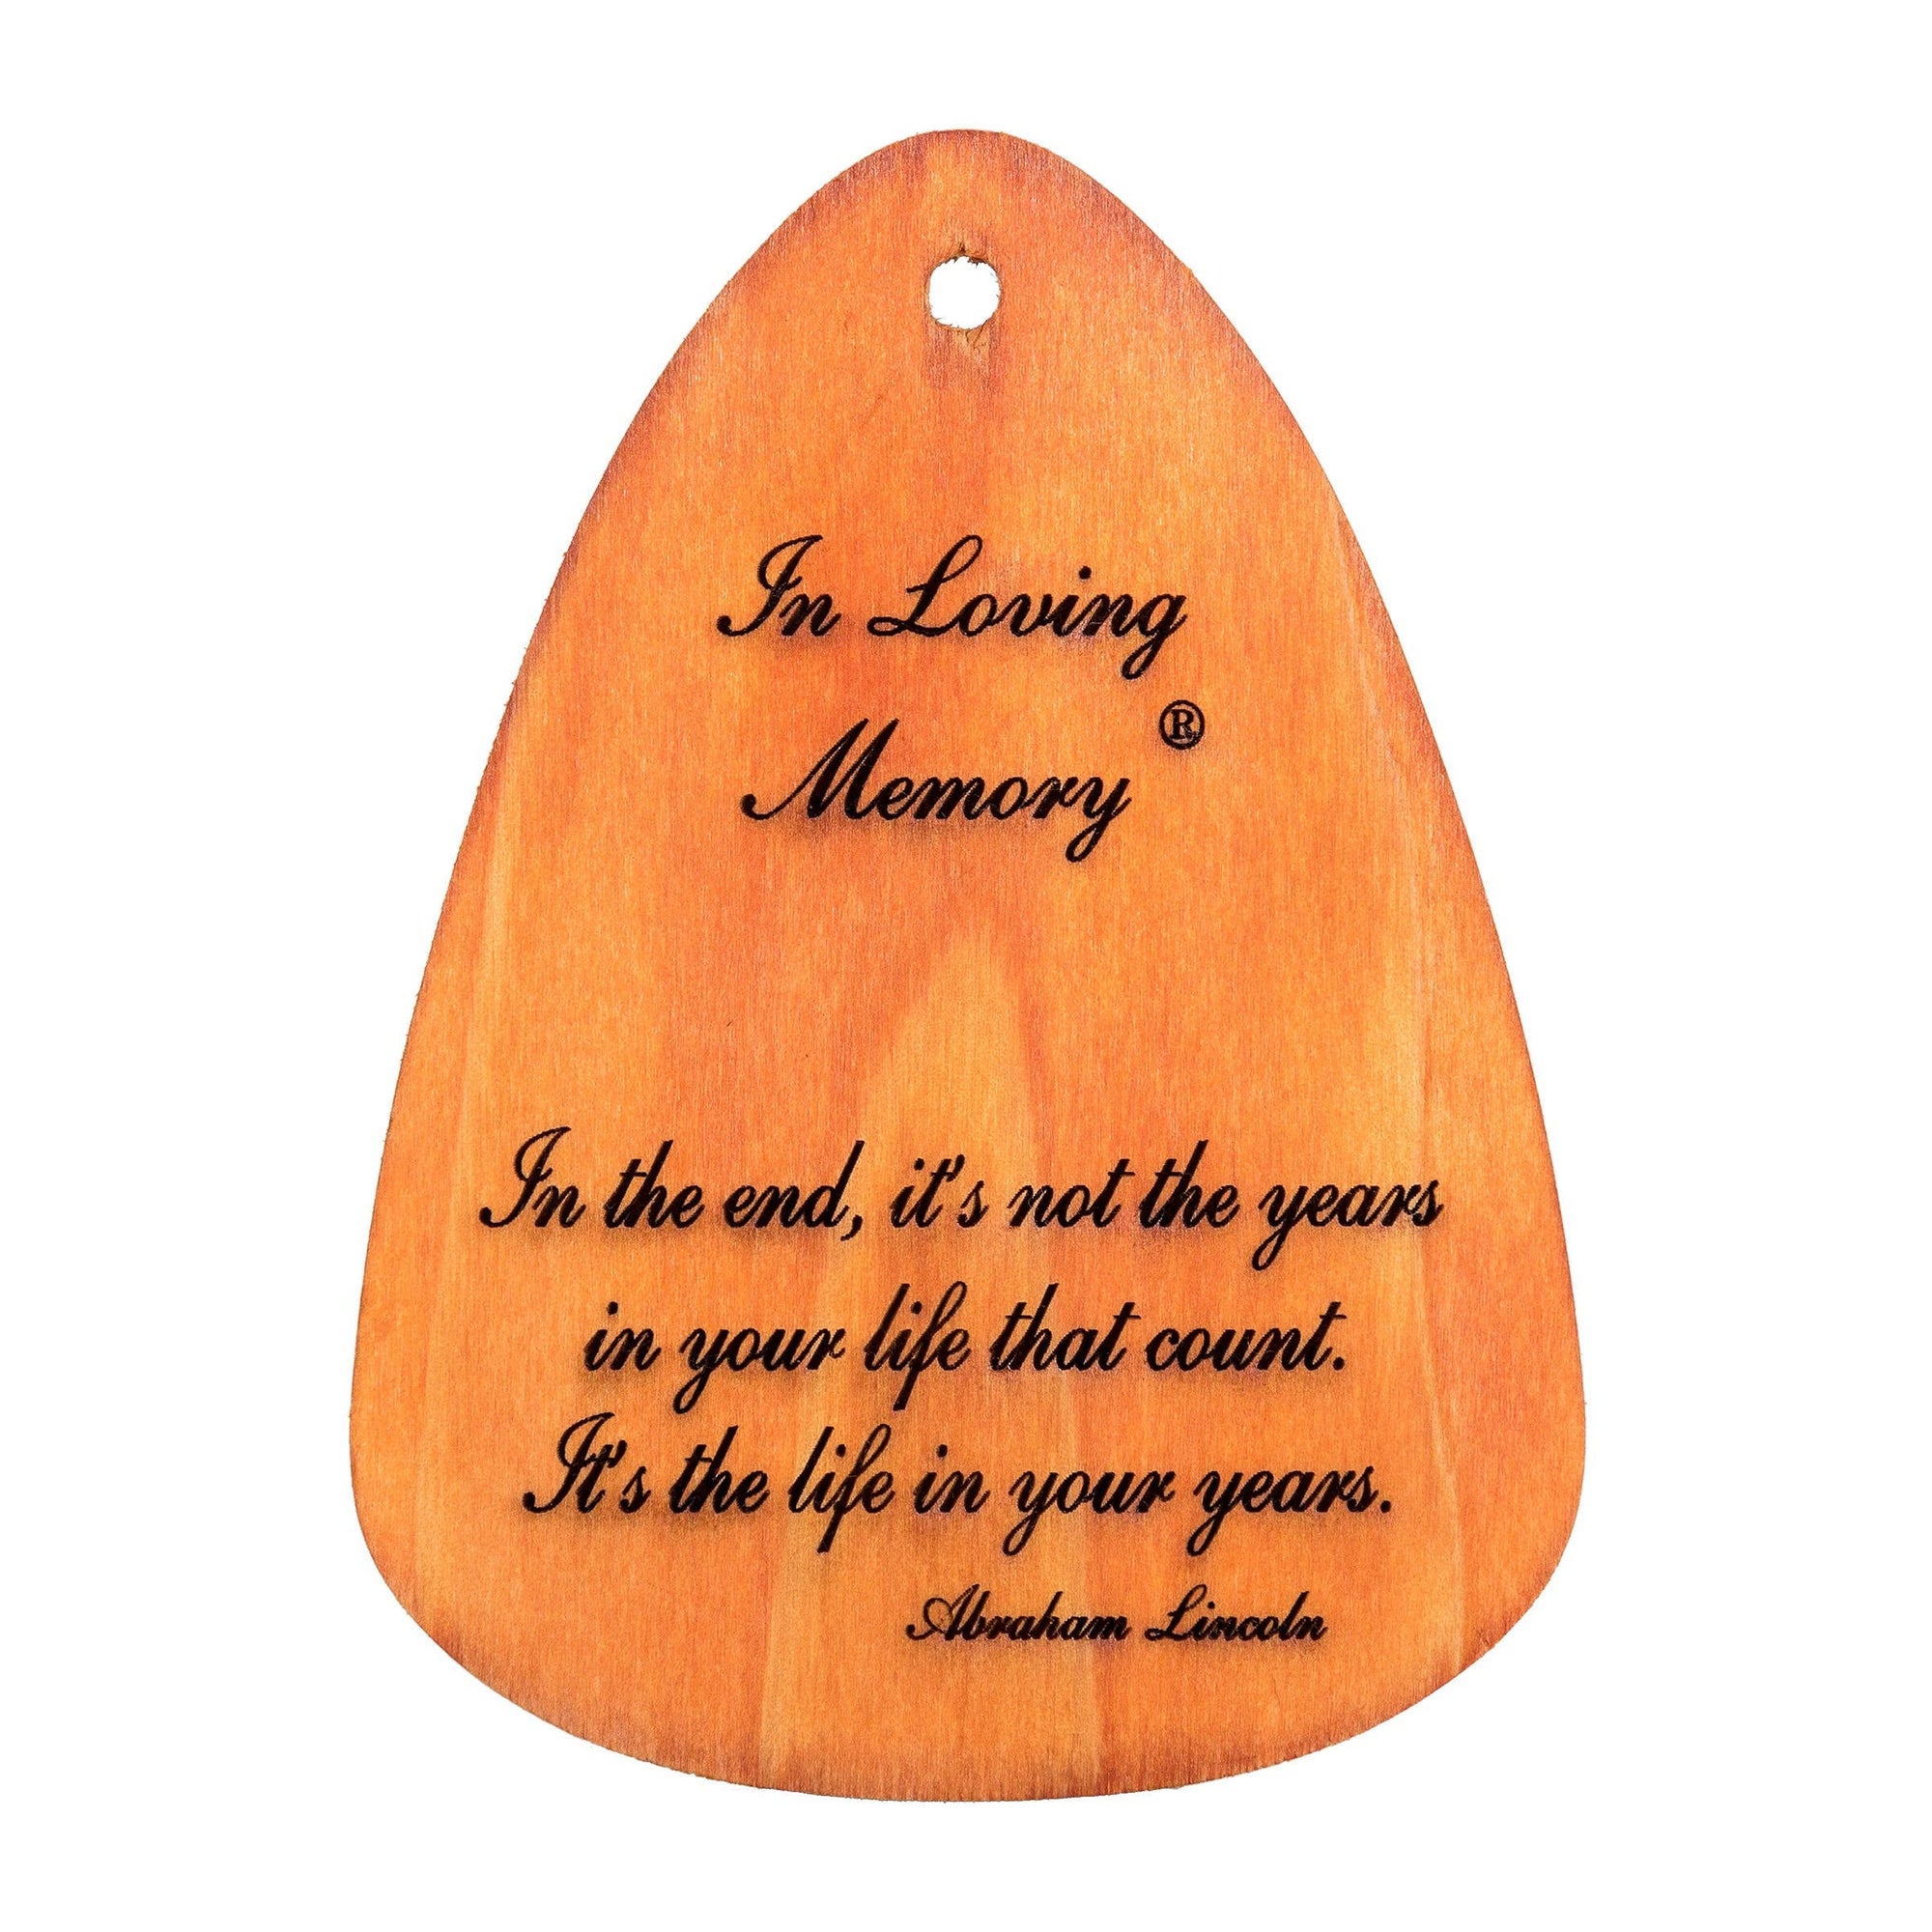 A wooden plaque with the product name "In Loving Memory® Bronze 24-inch Windchime" engraved.